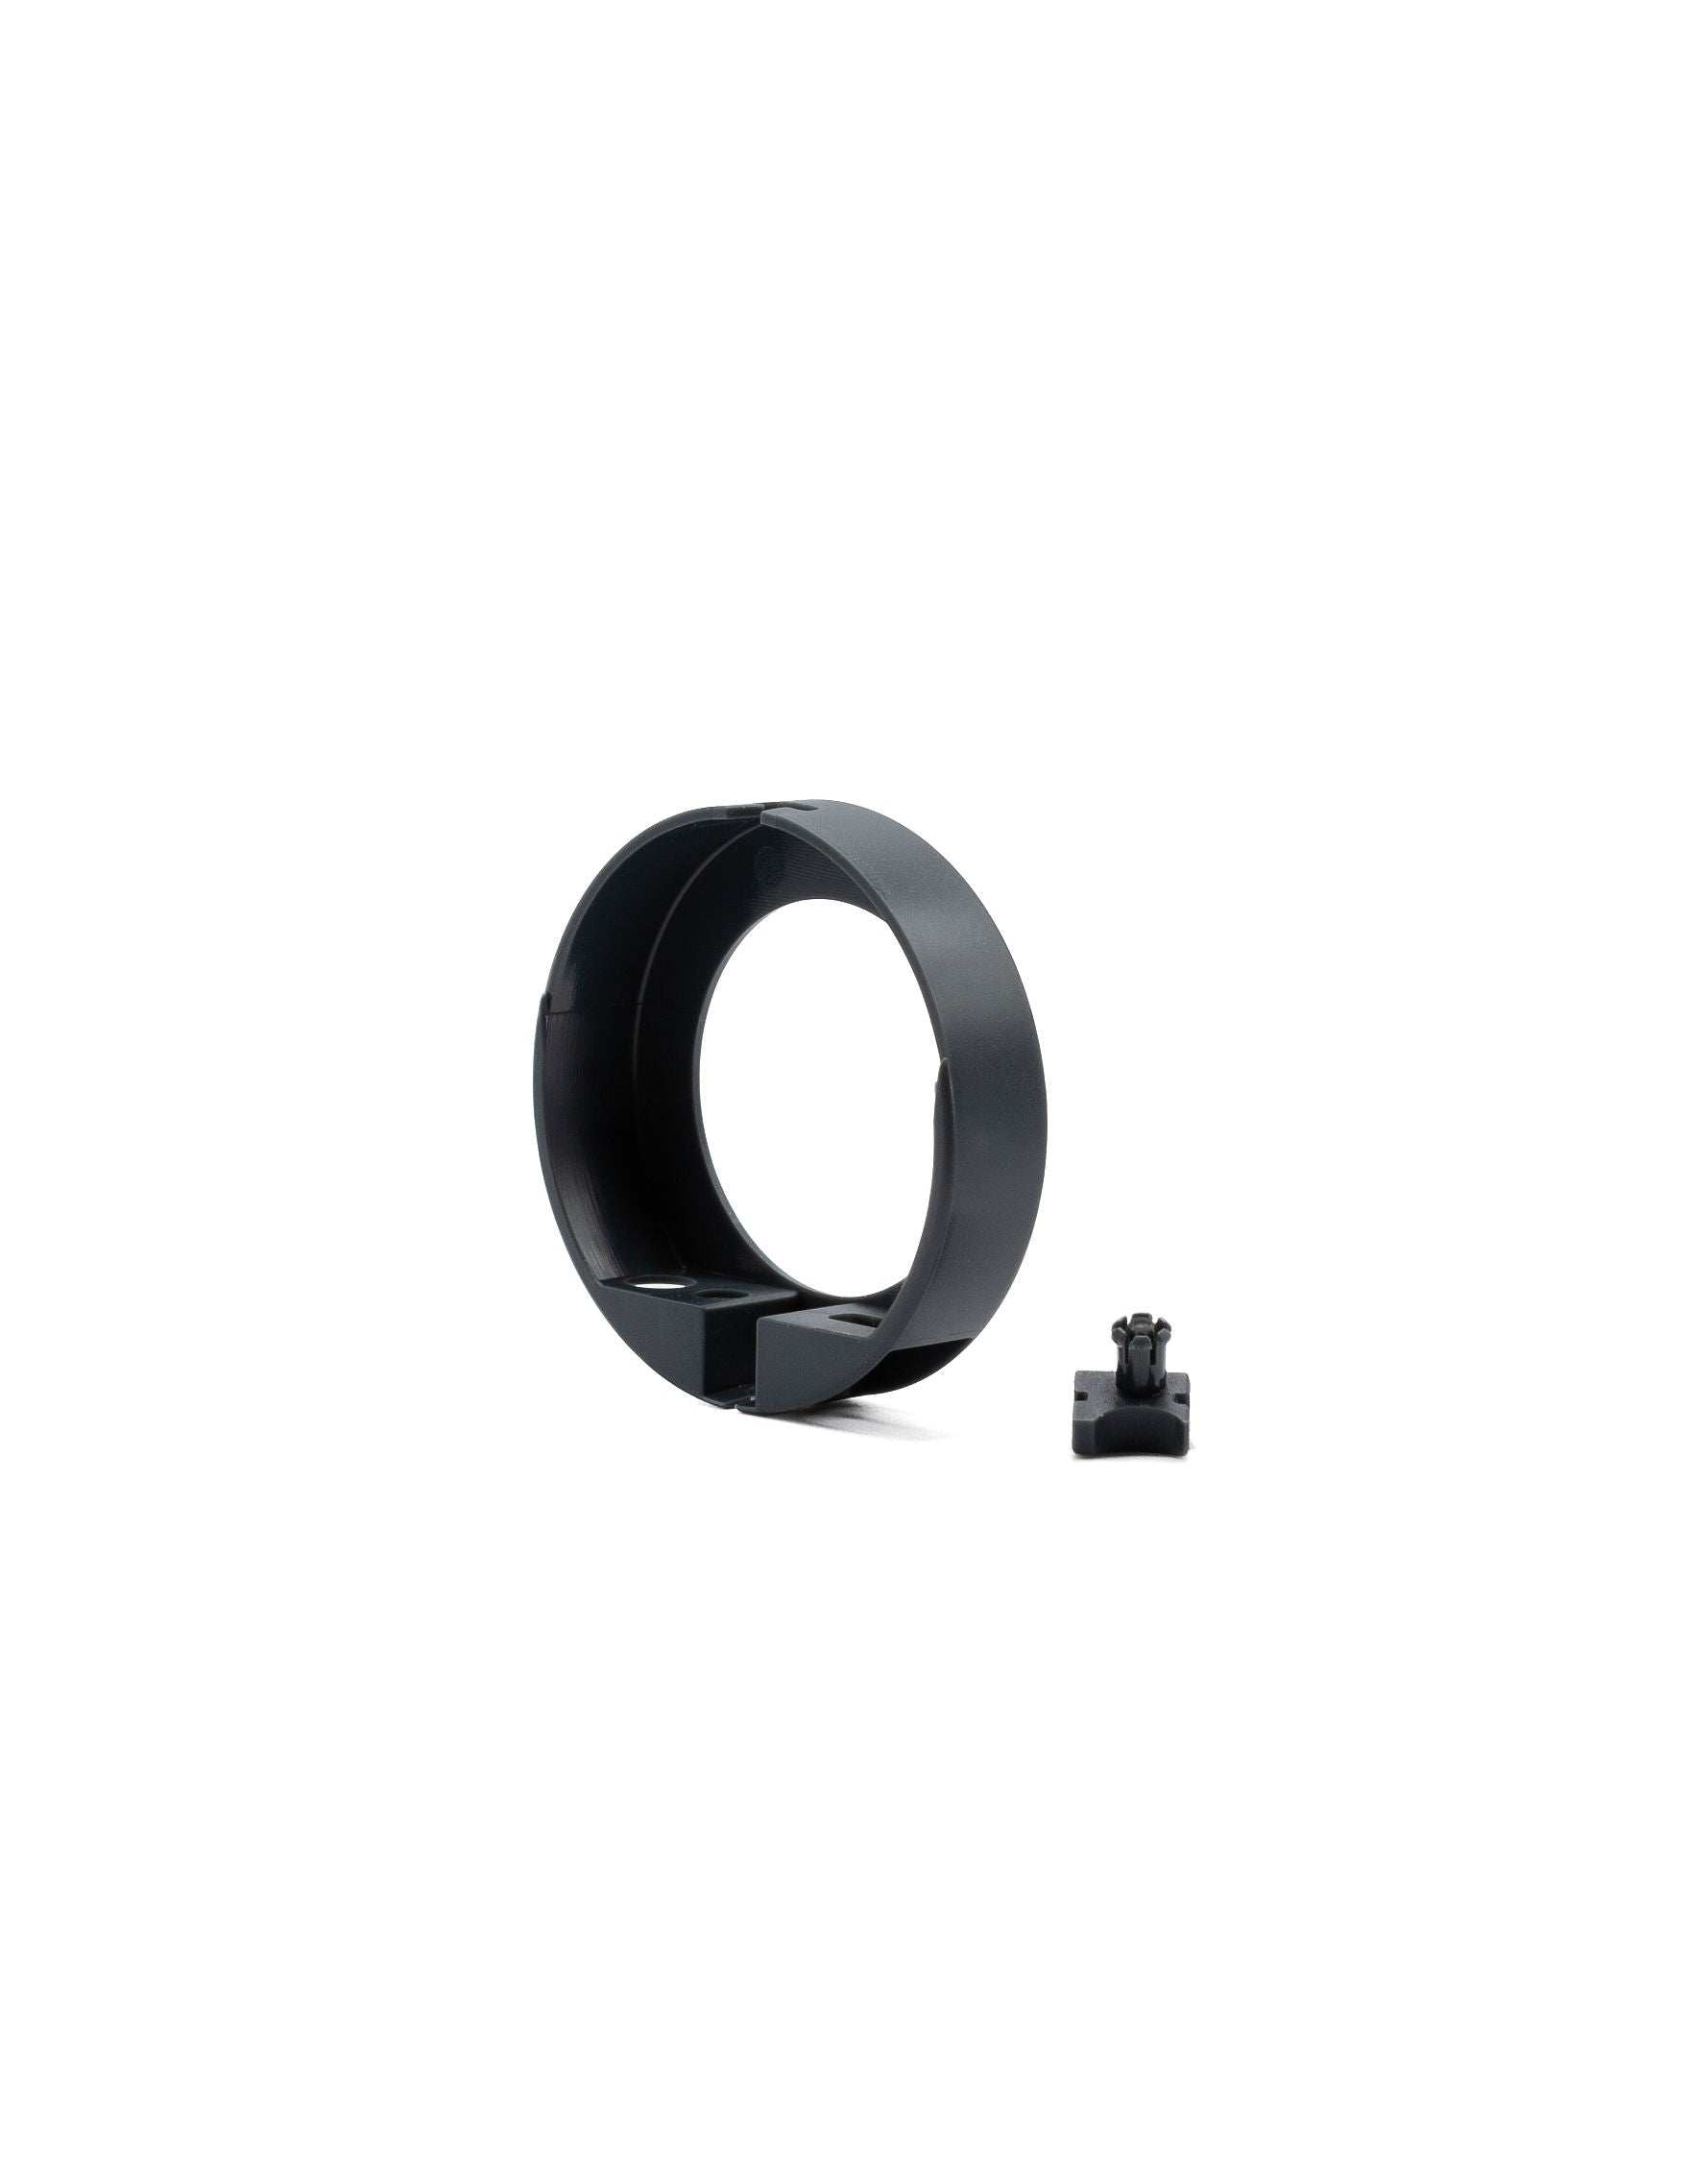 Coulisse Roller DC pullmotor cover - Anthracite (RC3136-AN)